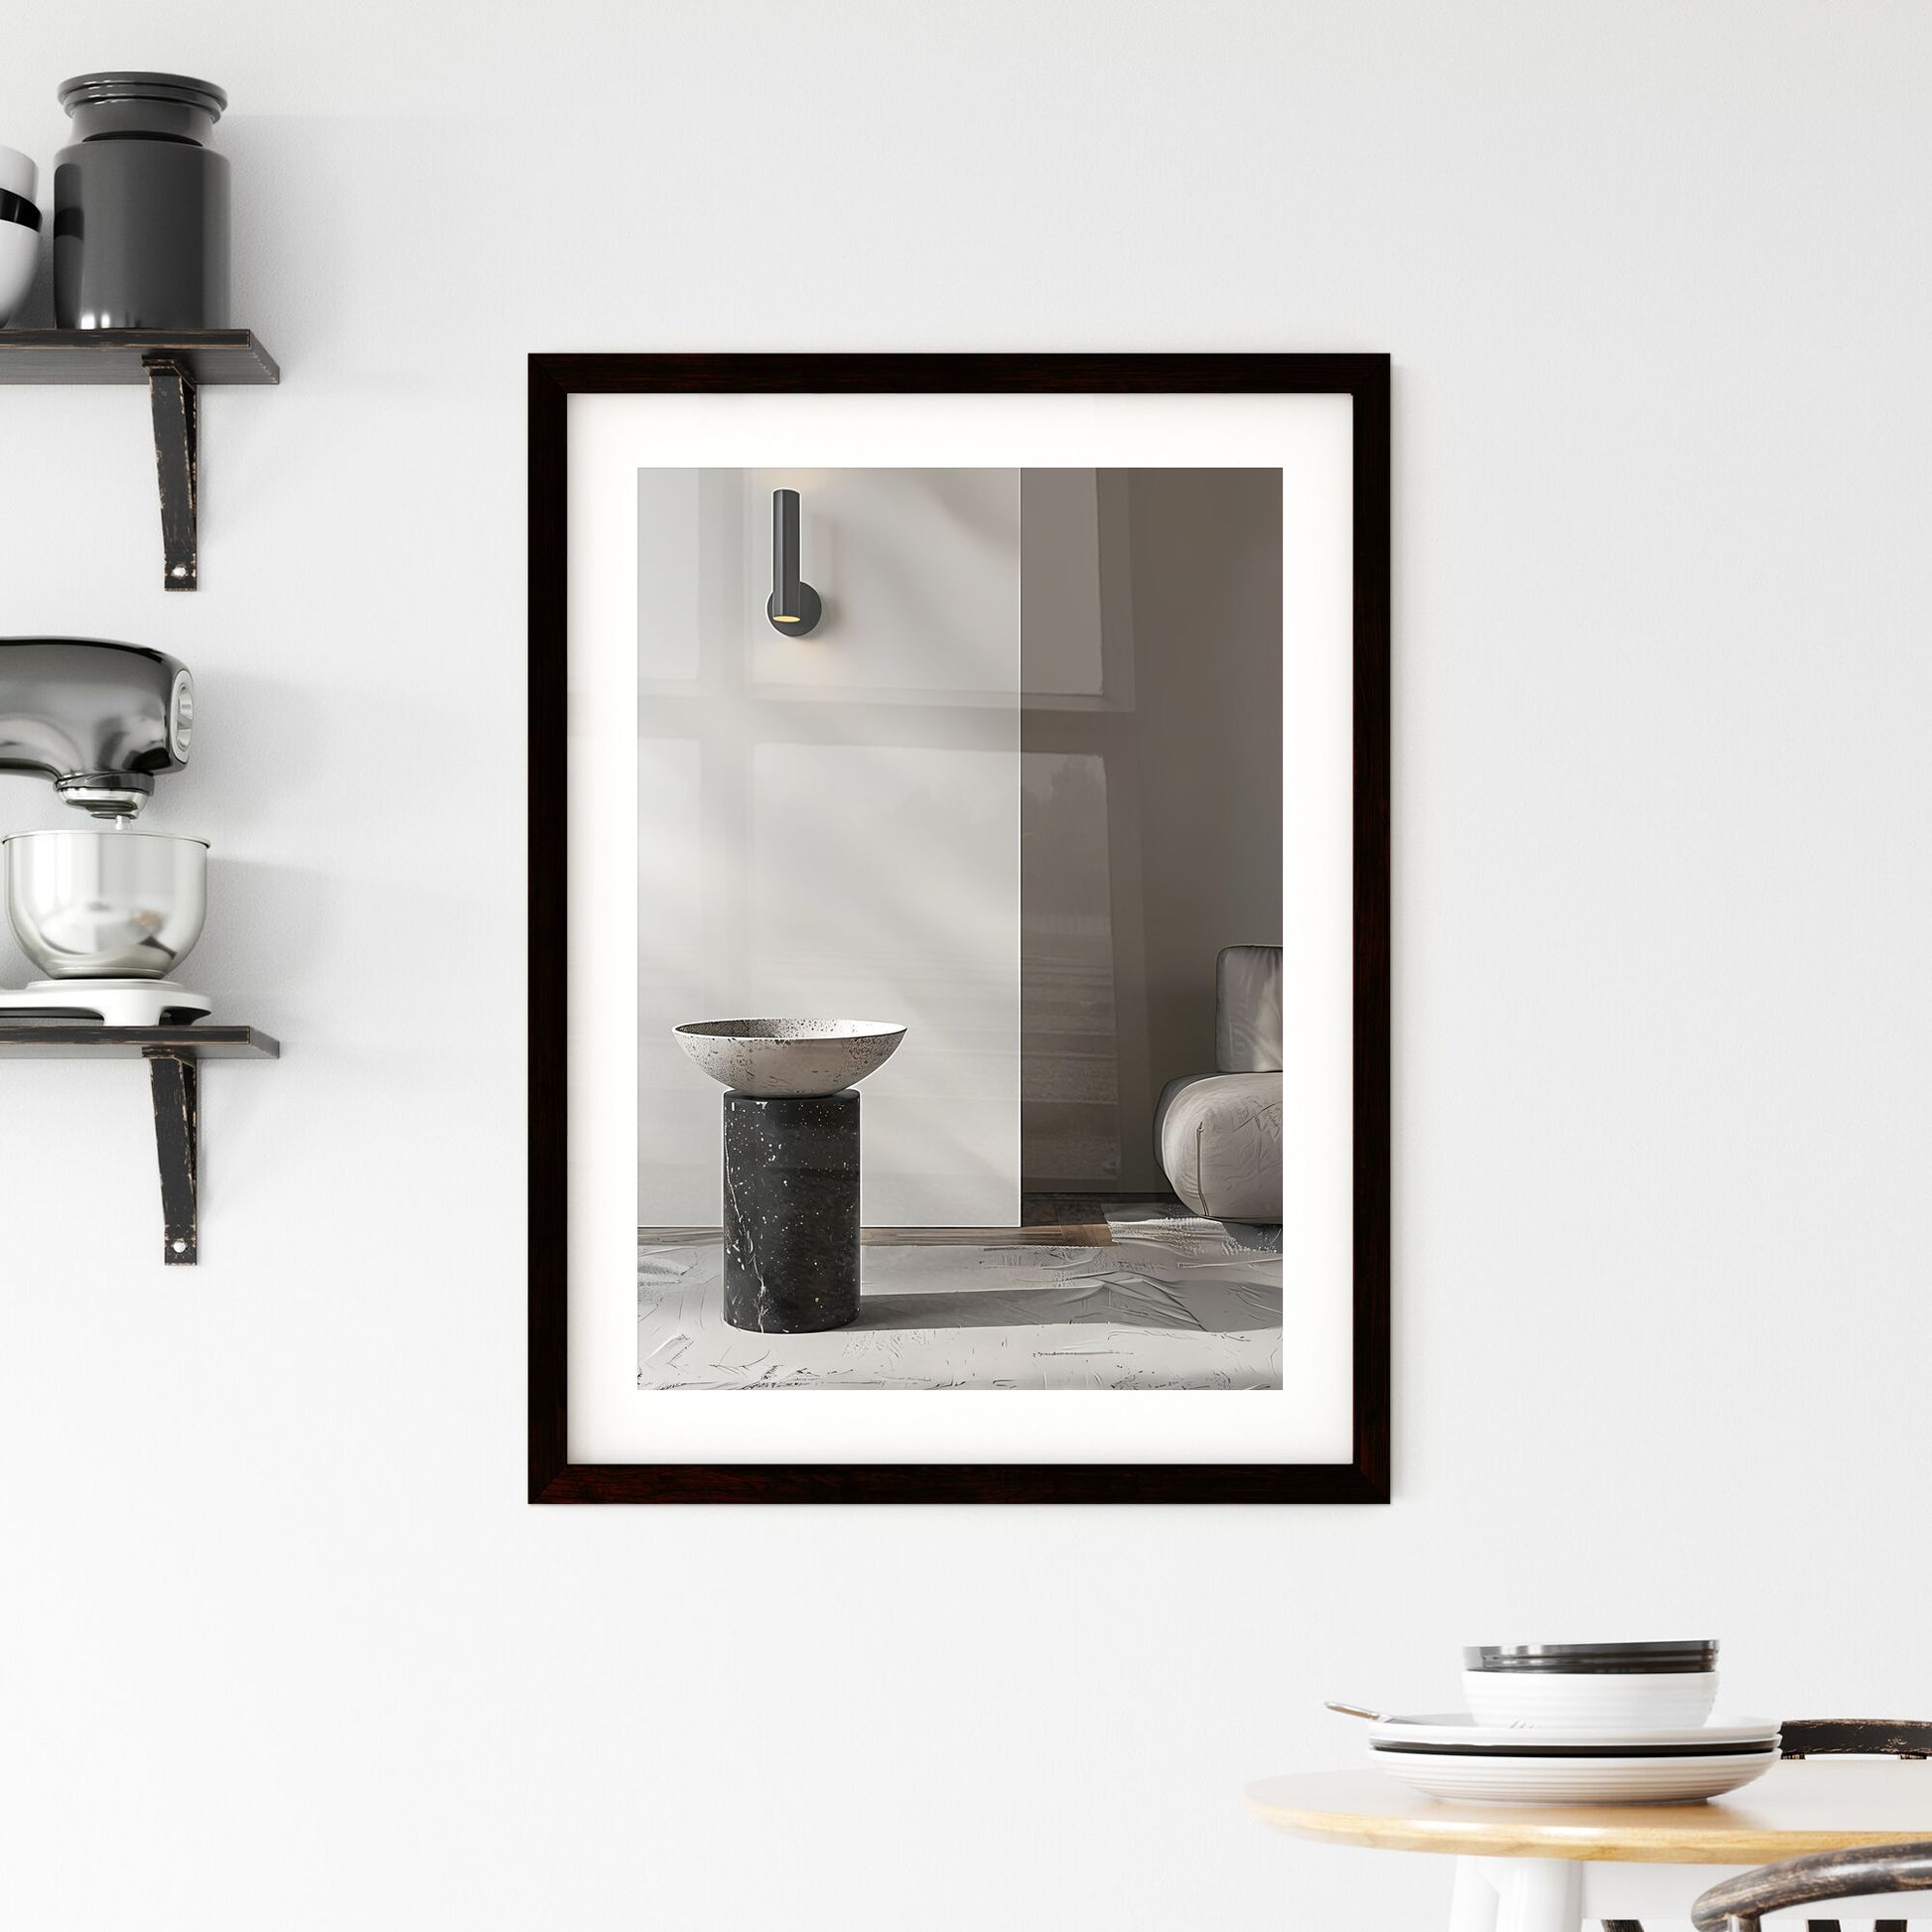 Minimalist black and white side table with concrete bowl and wall light on grey carpet floor, hyper realistic photography, abstract art painting, marble pedestal, round bowl art focus Default Title